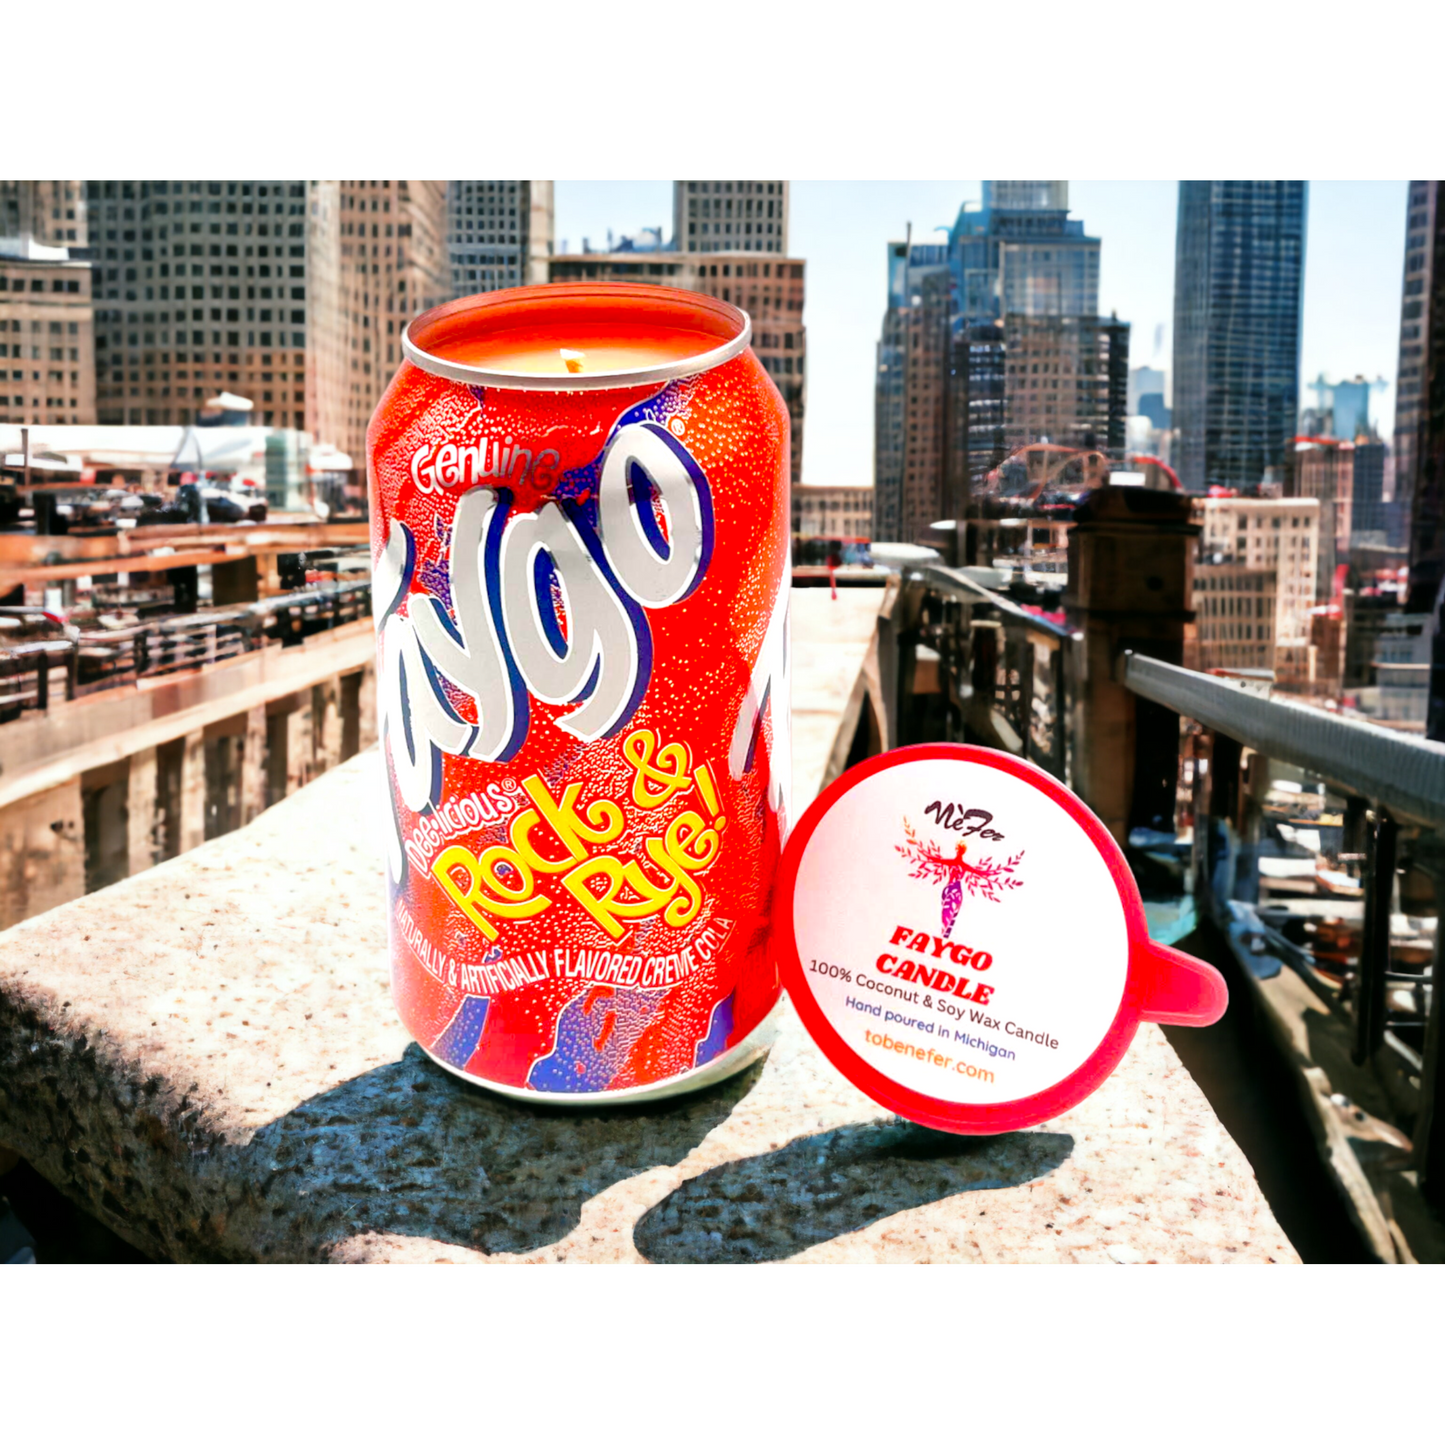 Faygo Rock & Rye Candle | 12 oz Can